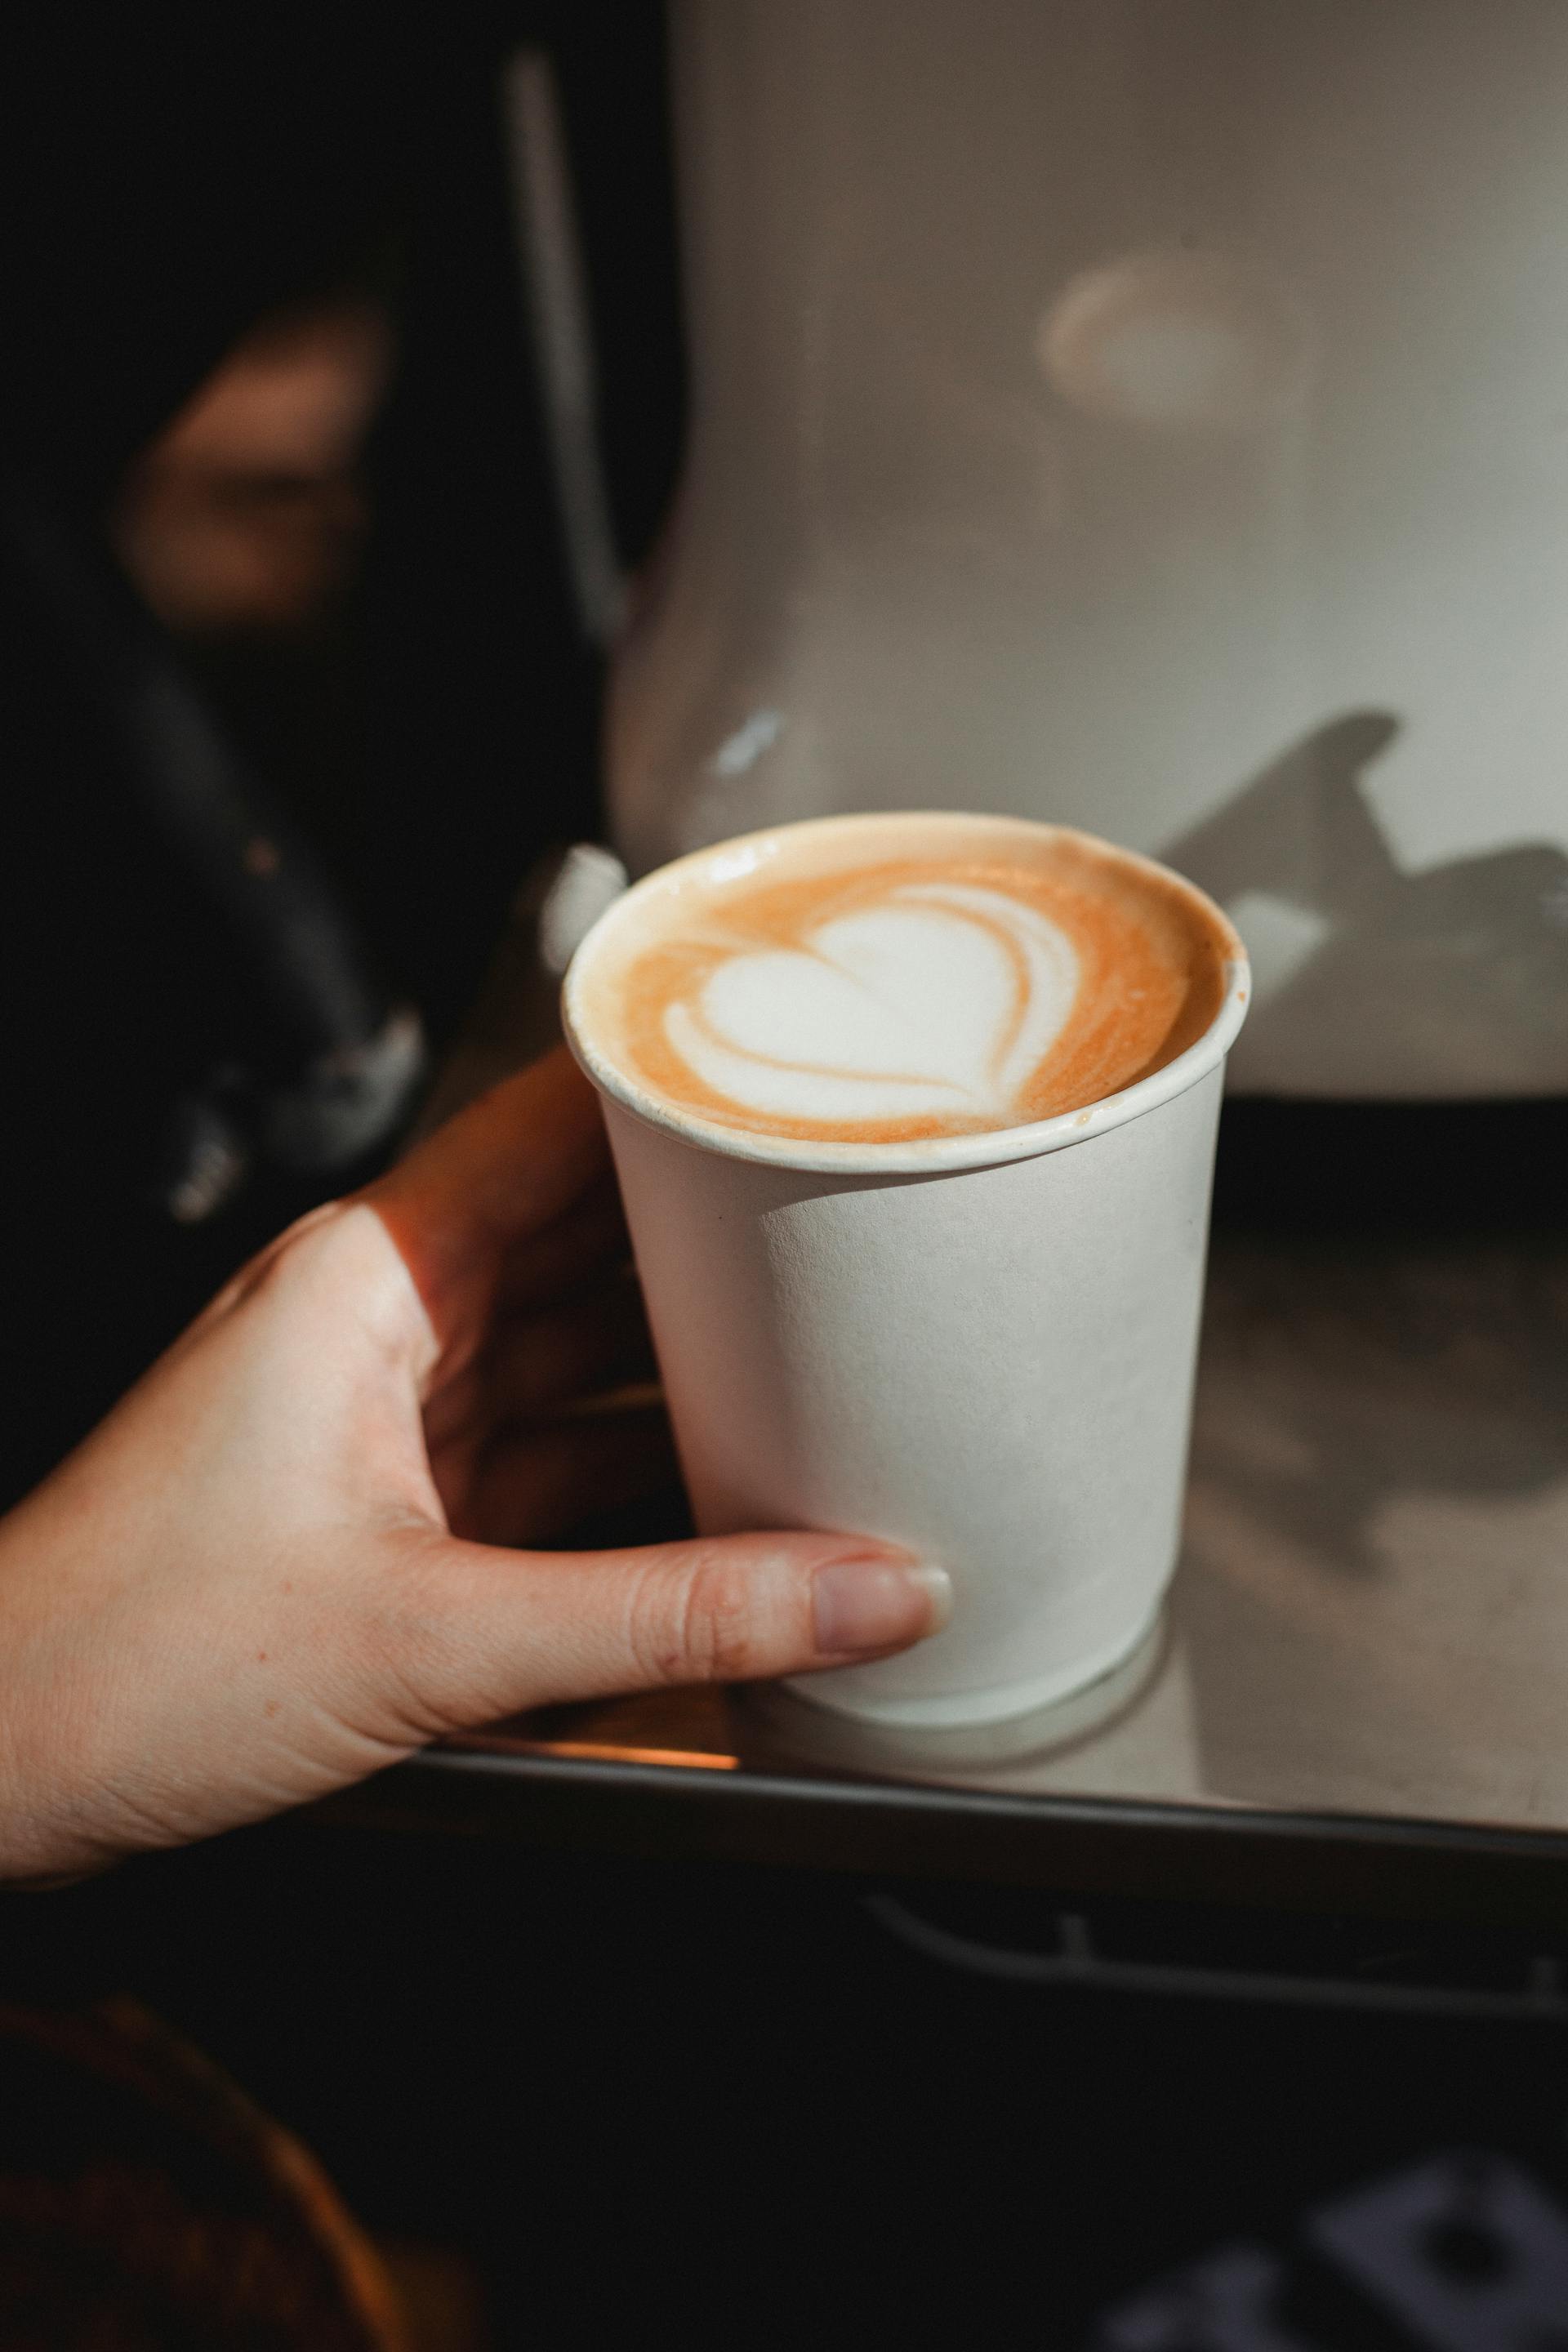 A person holding a coffee cup | Source: Pexels